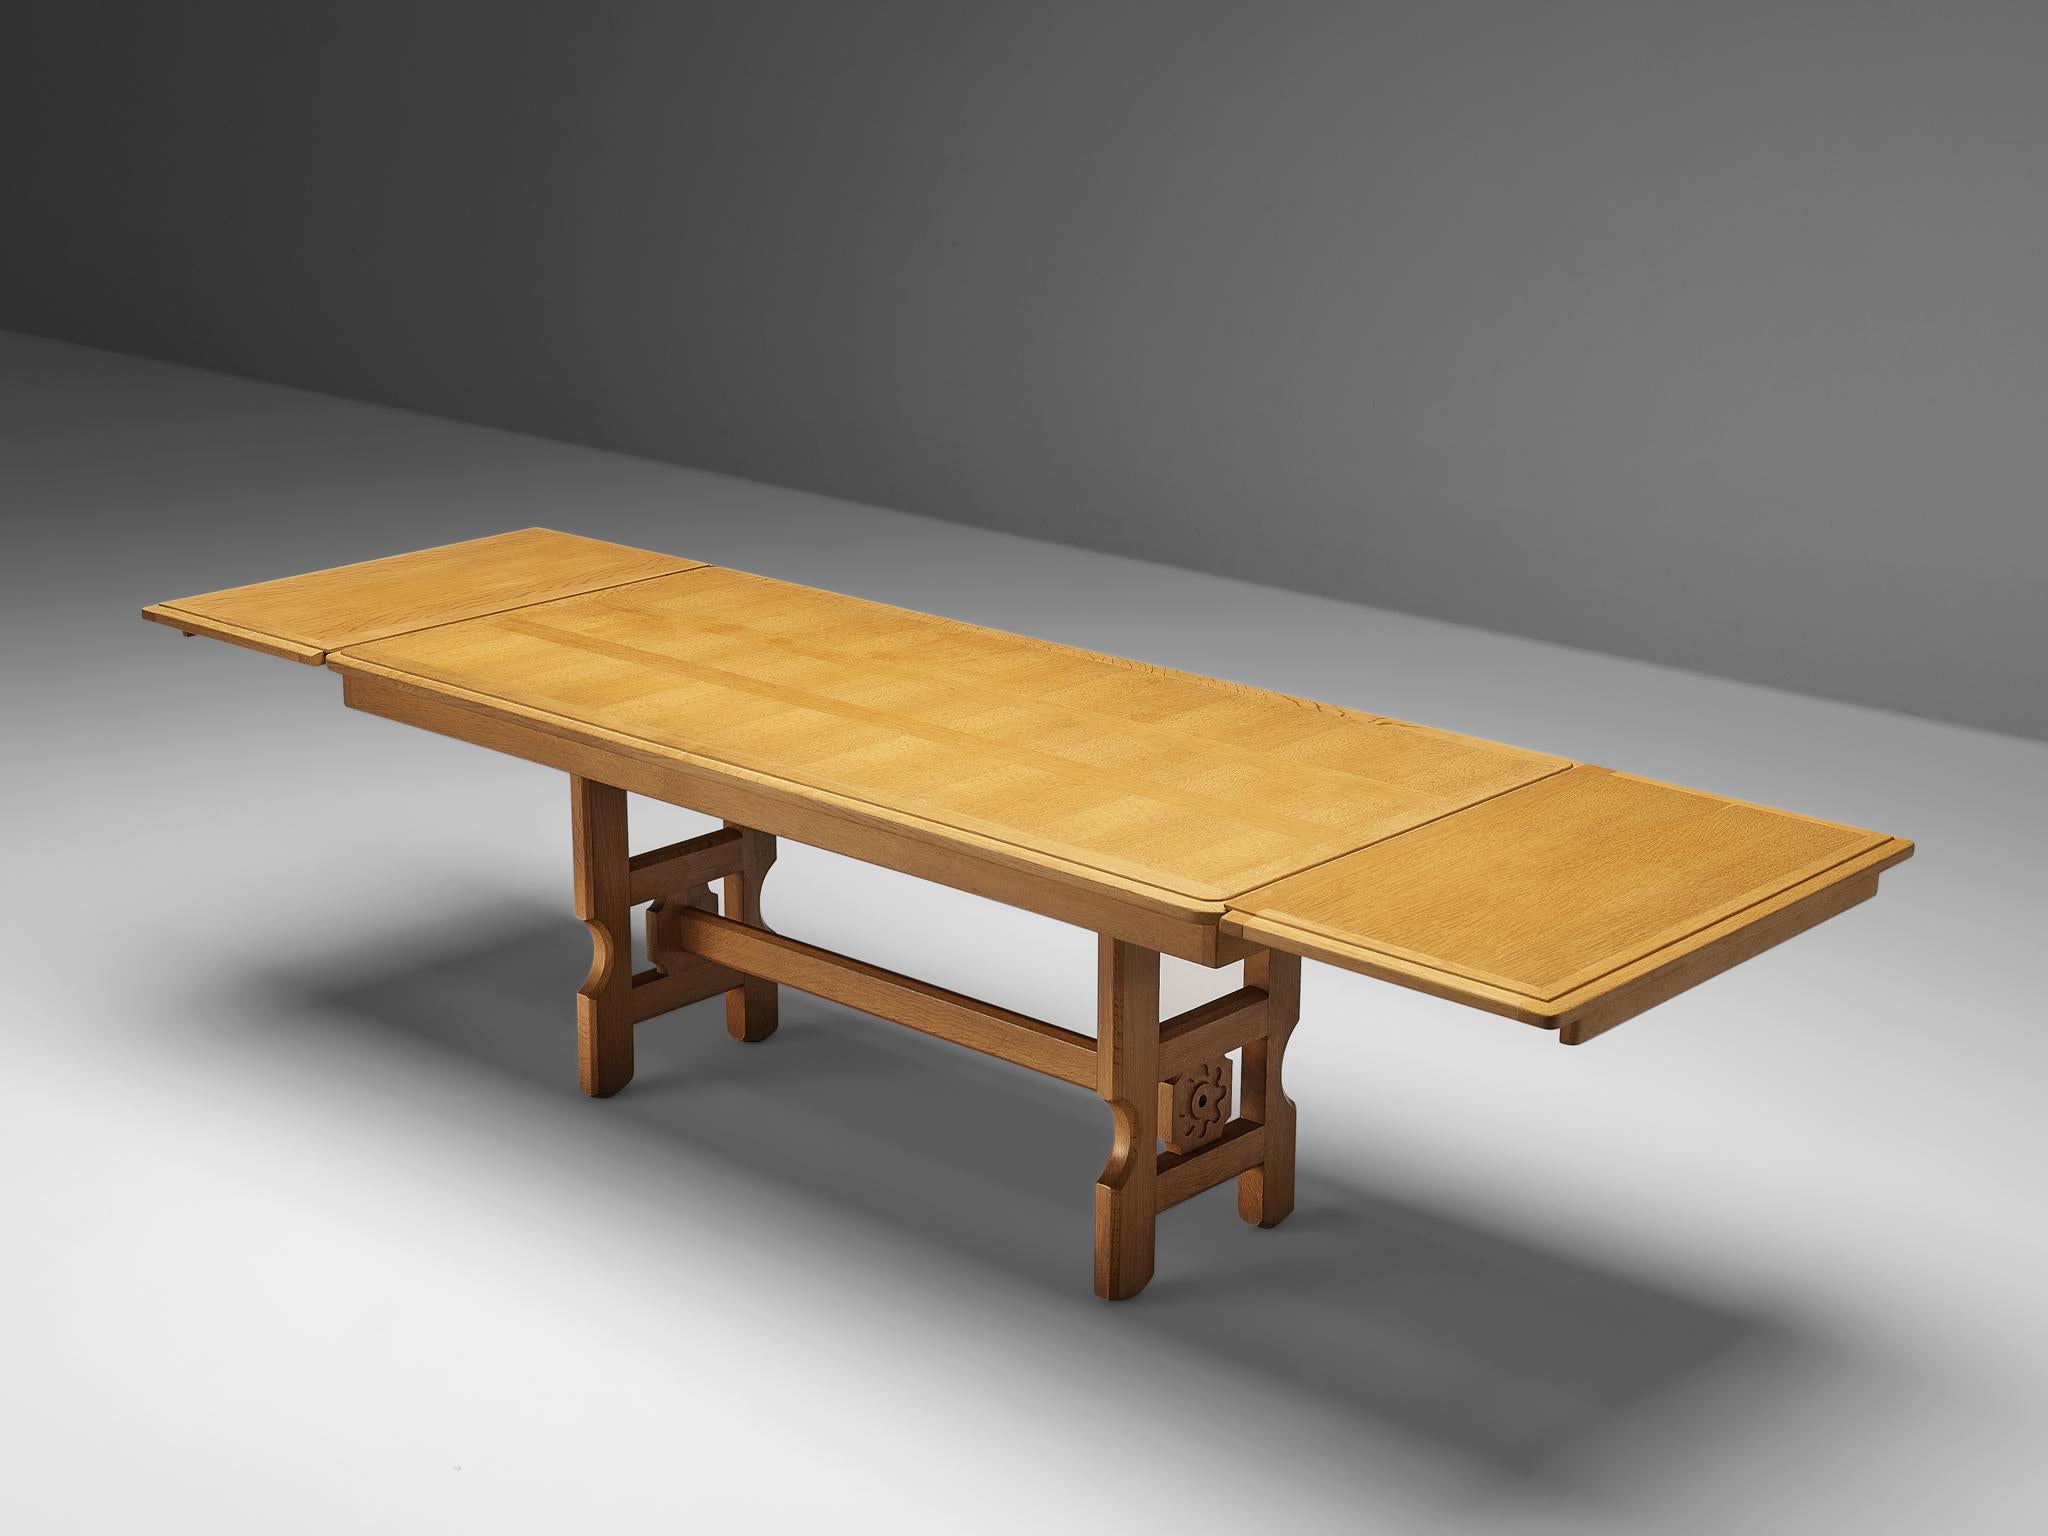 Guillerme et Chambron for Votre Maison, extendable dining table, oak, 1960s

Extendable dining table in solid oak by French designers Guillerme et Chambron. This elegant table shows interesting details. Most attractive is the inlayed top. These